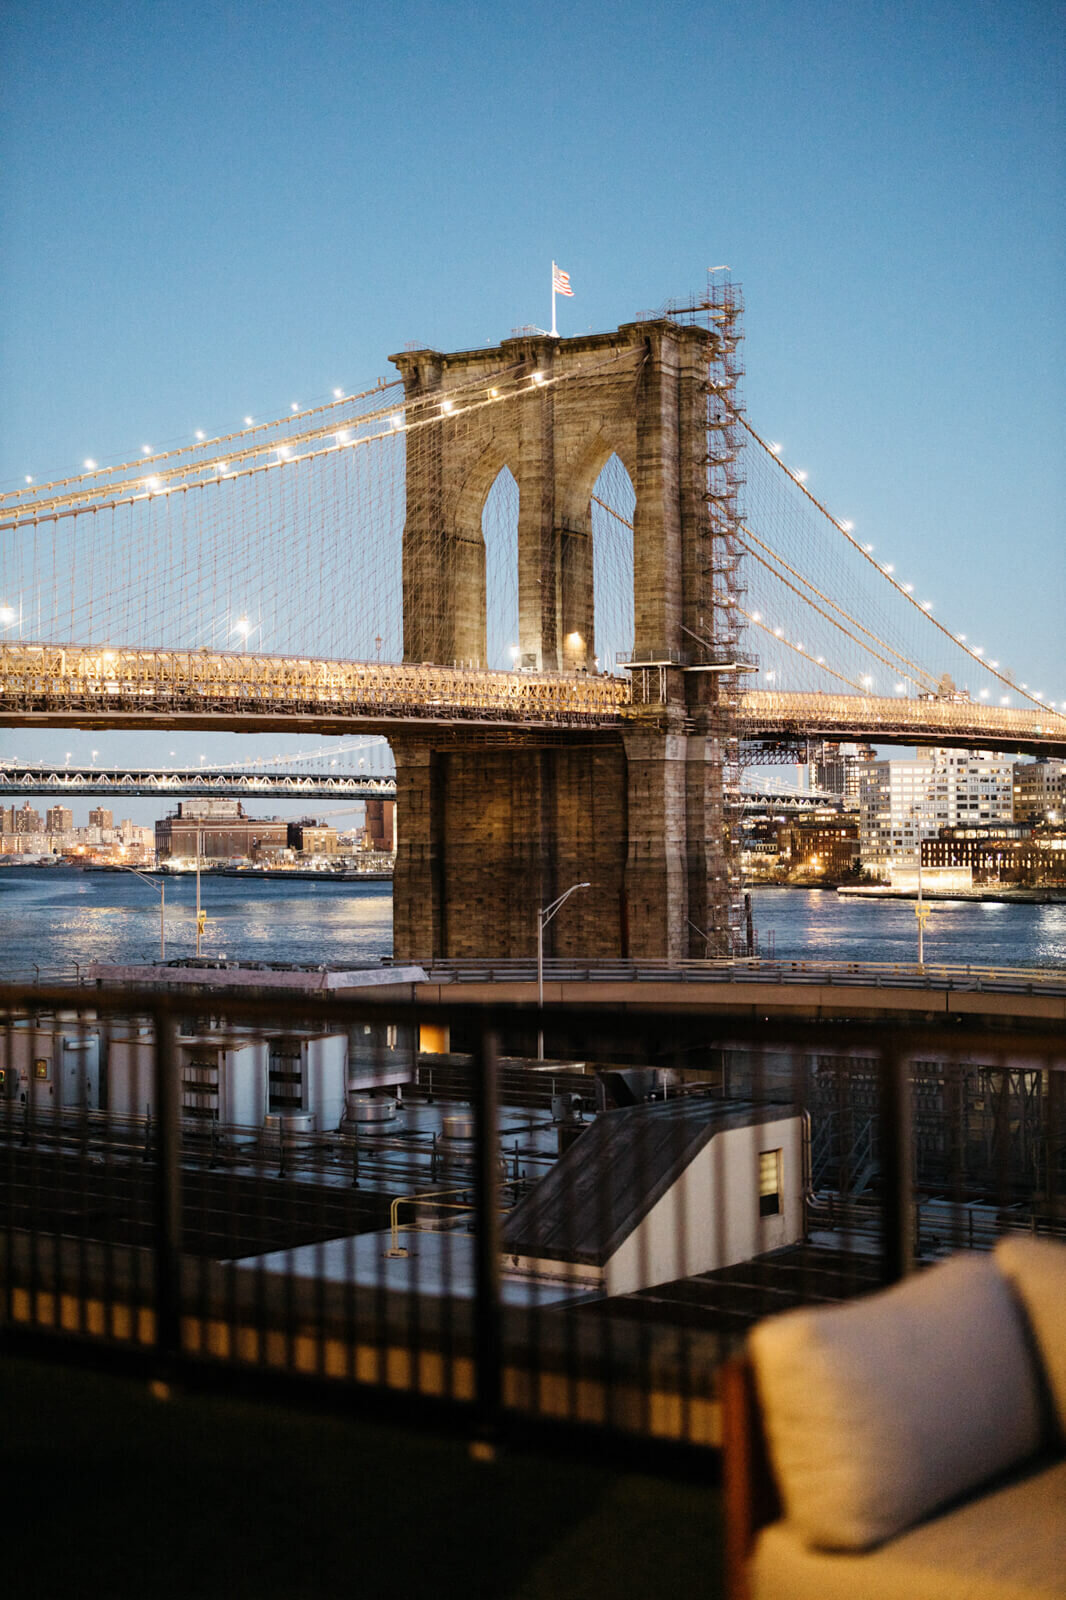 A view of the Brooklyn Bridge with the lights on.